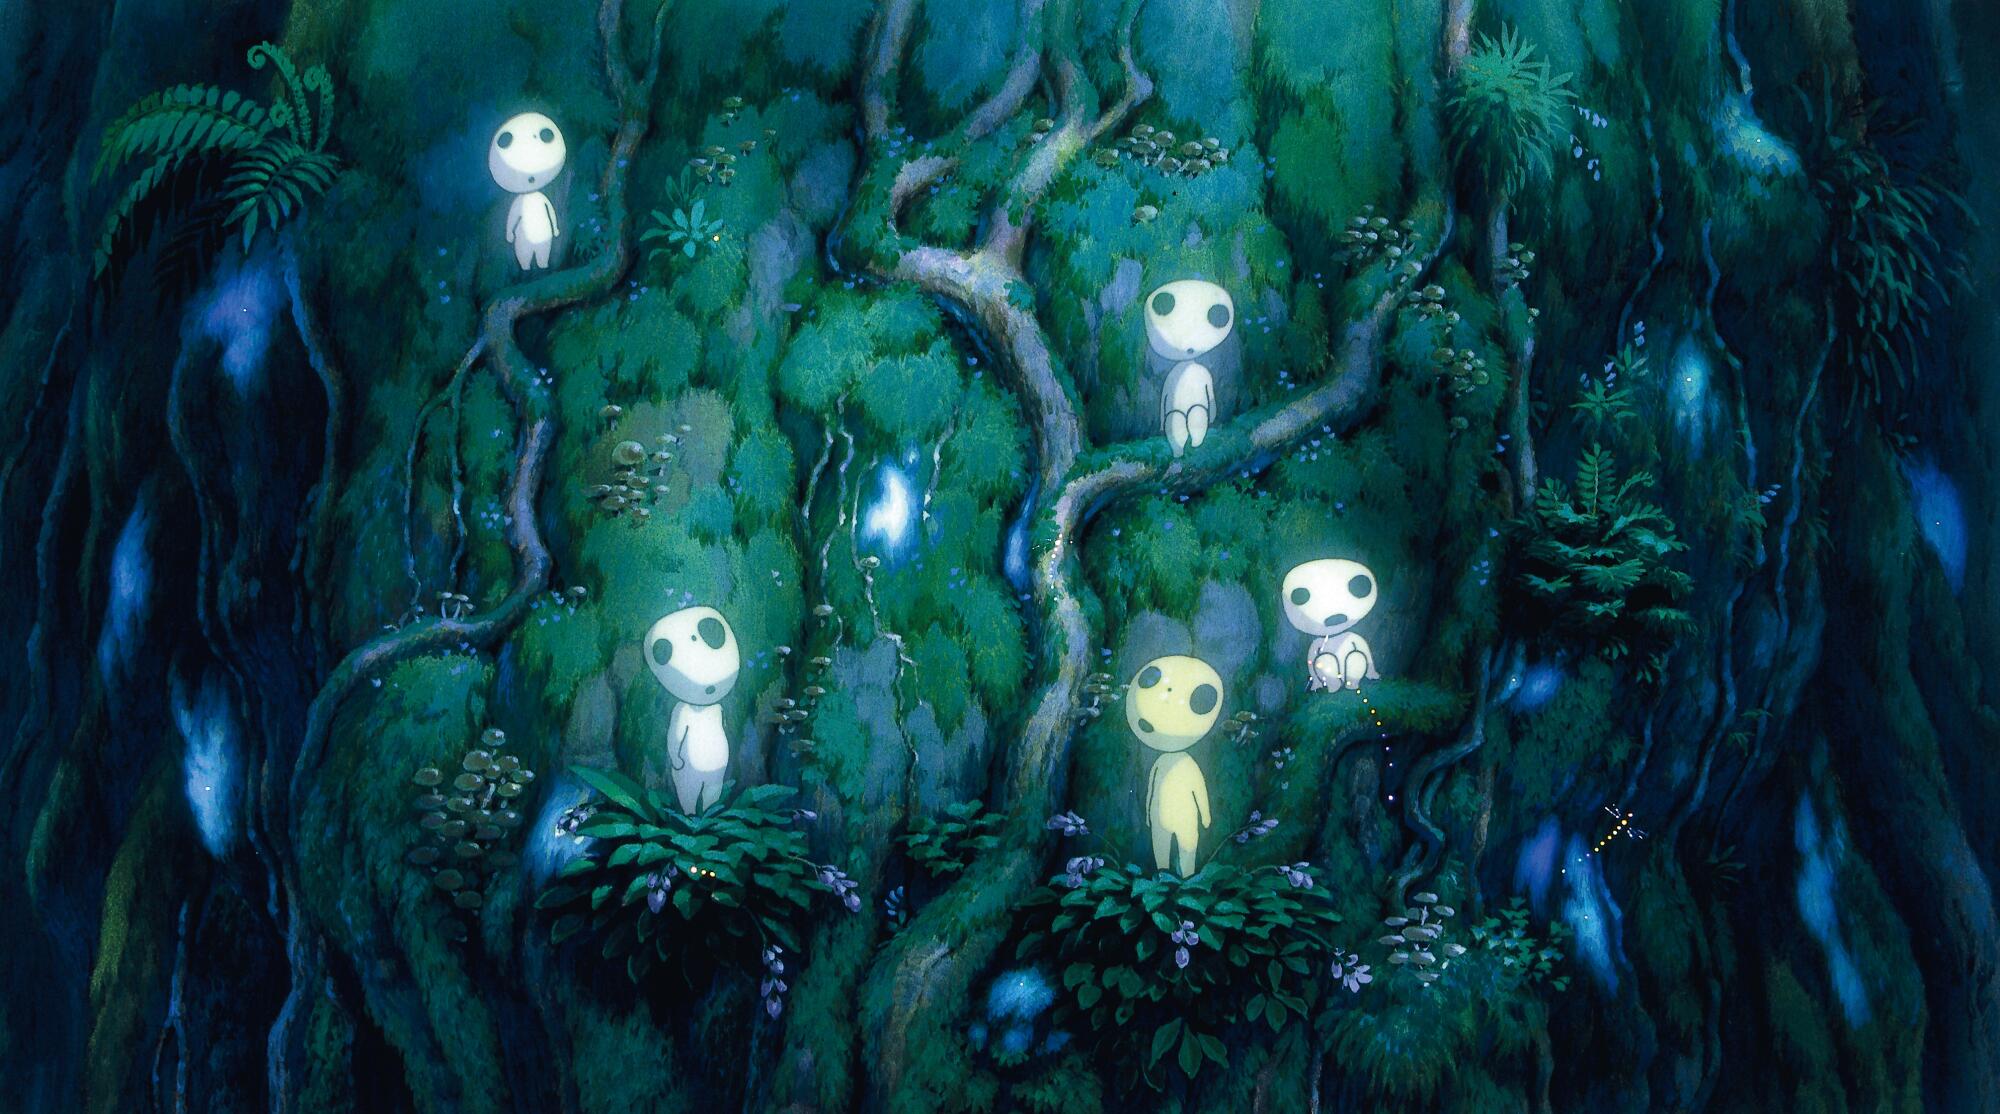 Small forest spirits appear on a large tree in a scene from "Princess Mononoke."